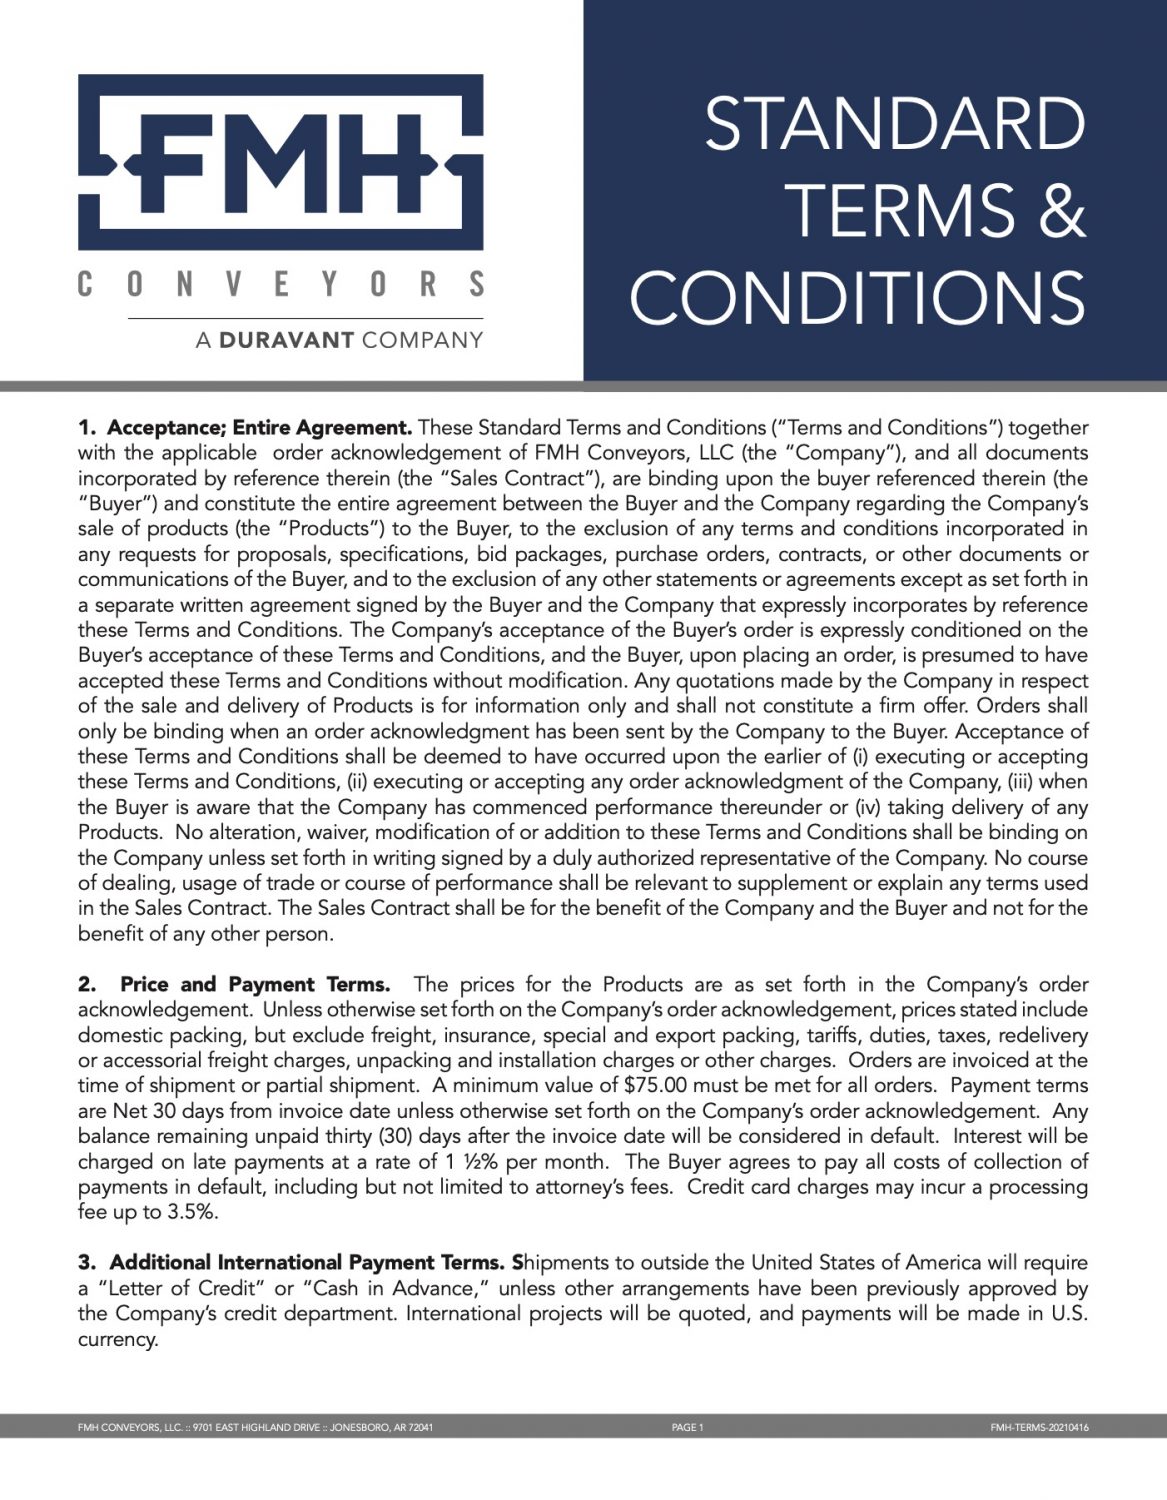 fmh terms and conditions